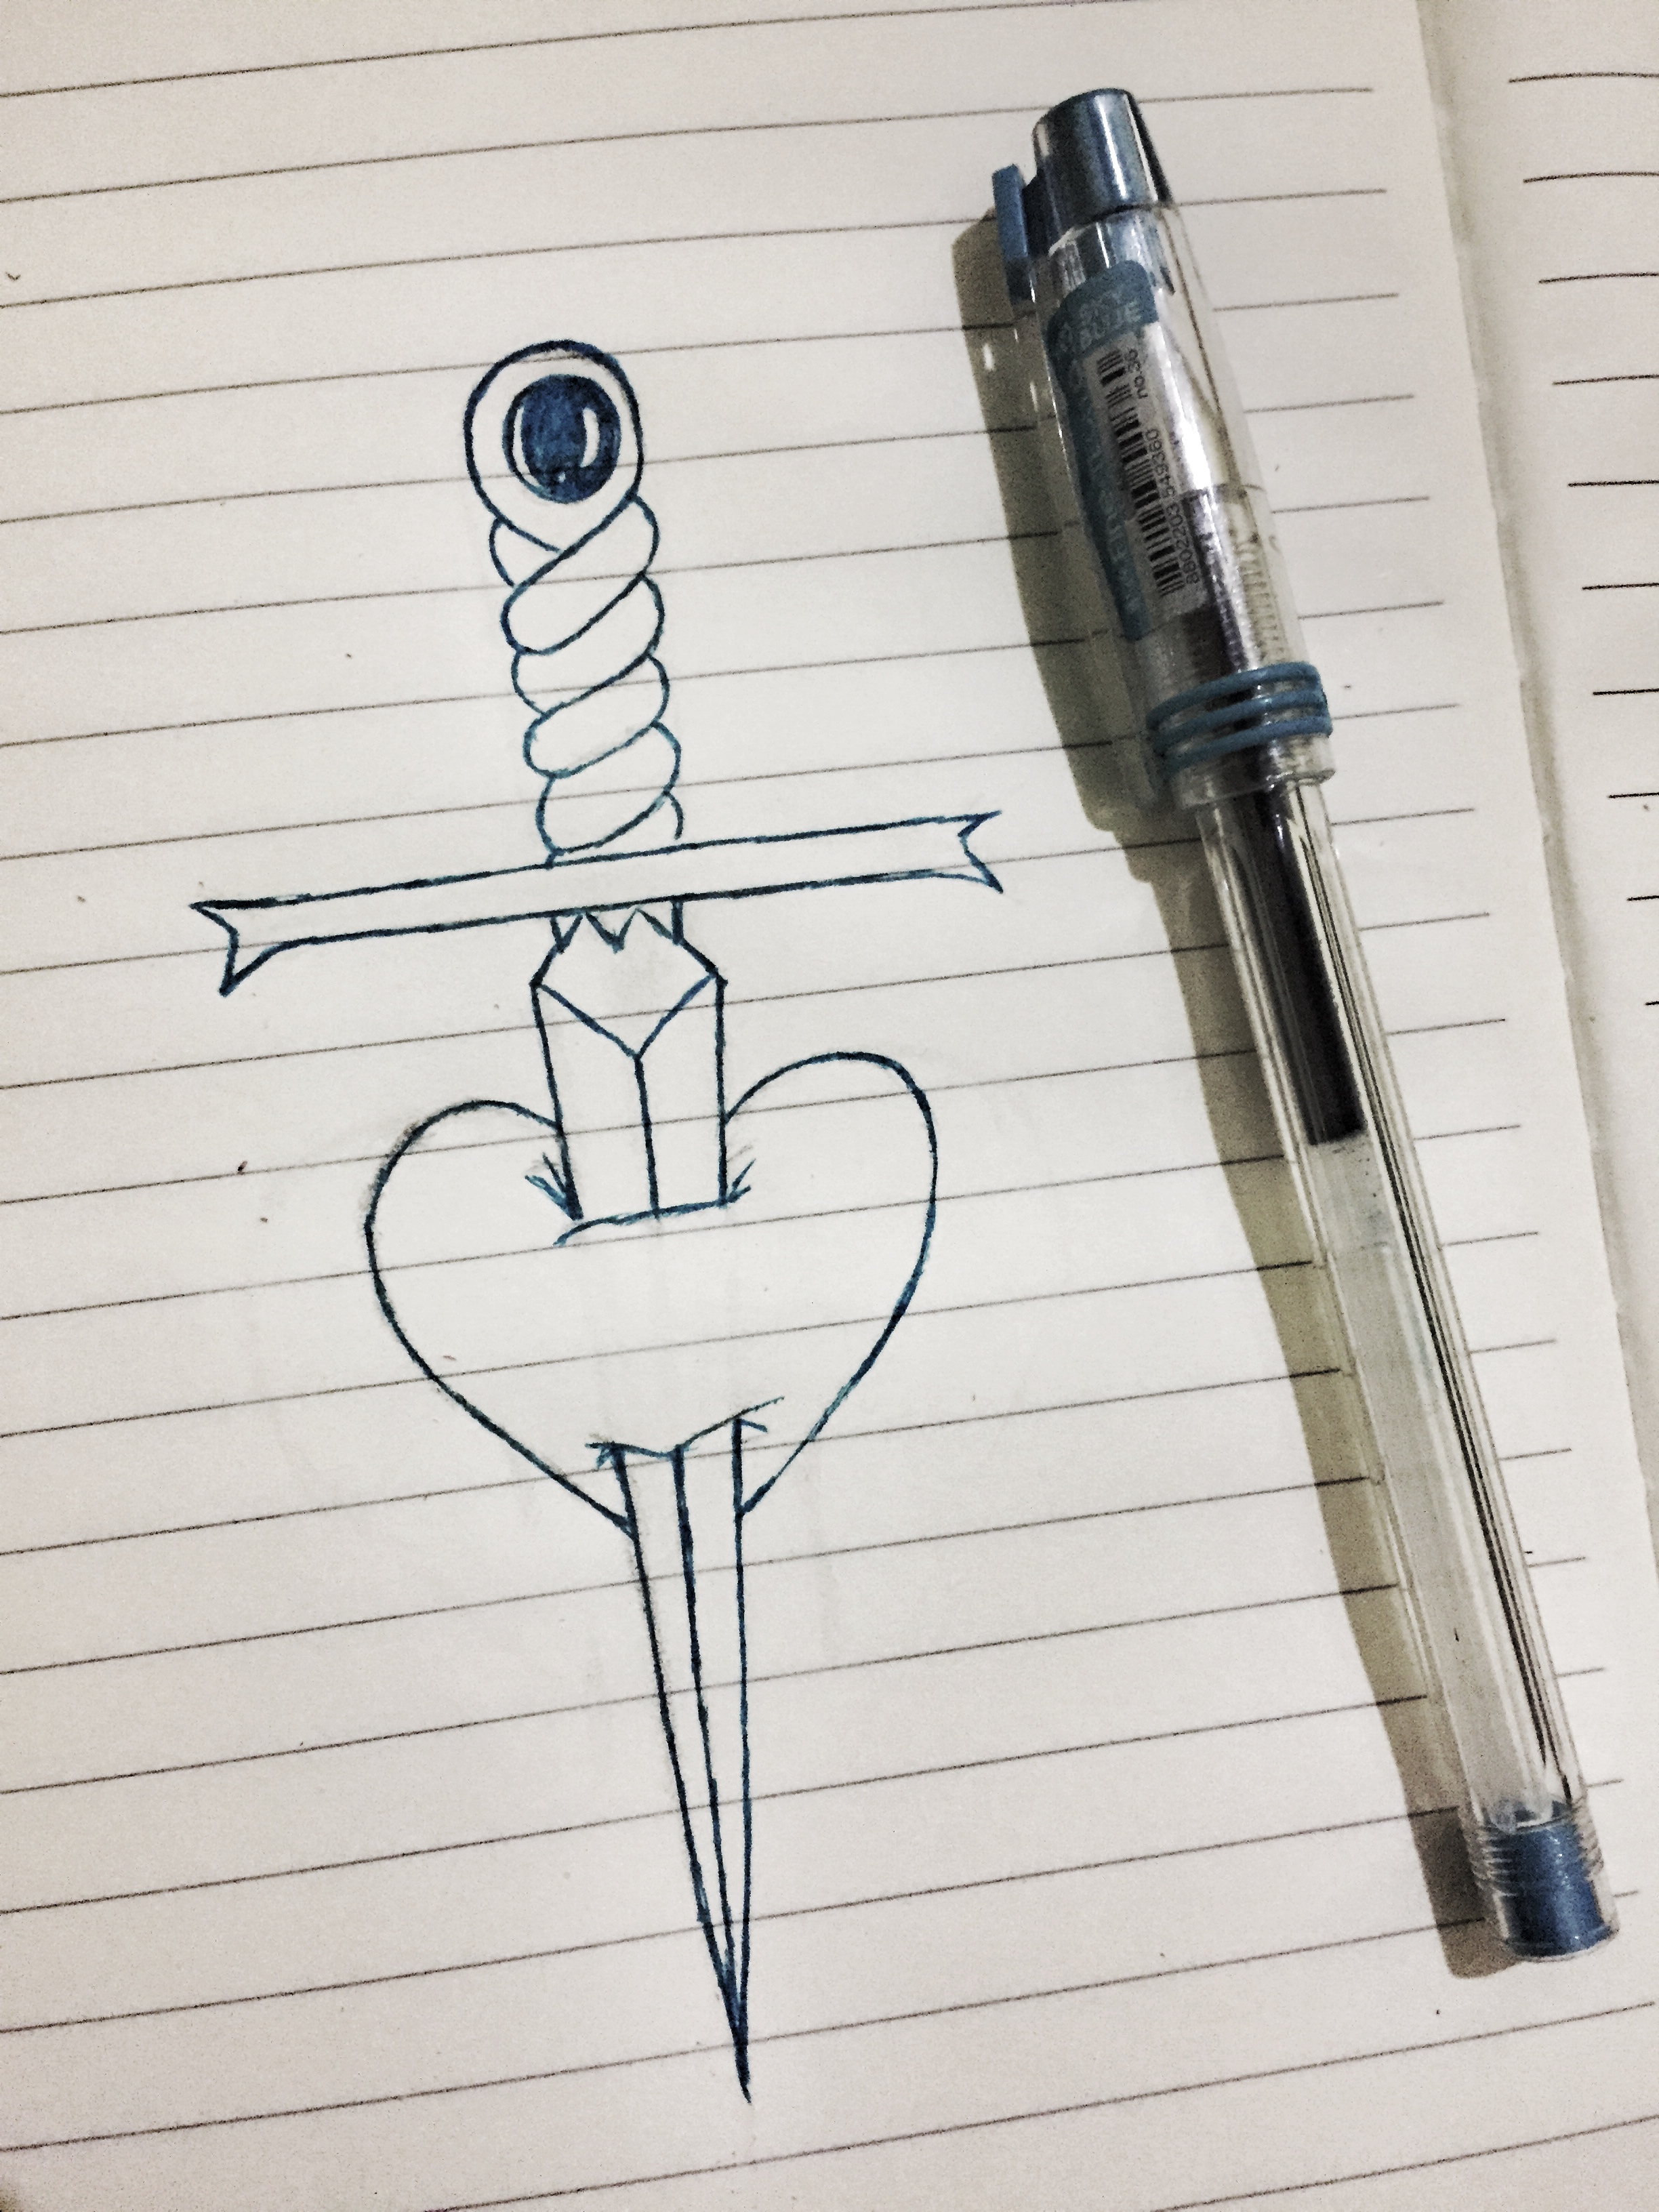 heart with sword drawing